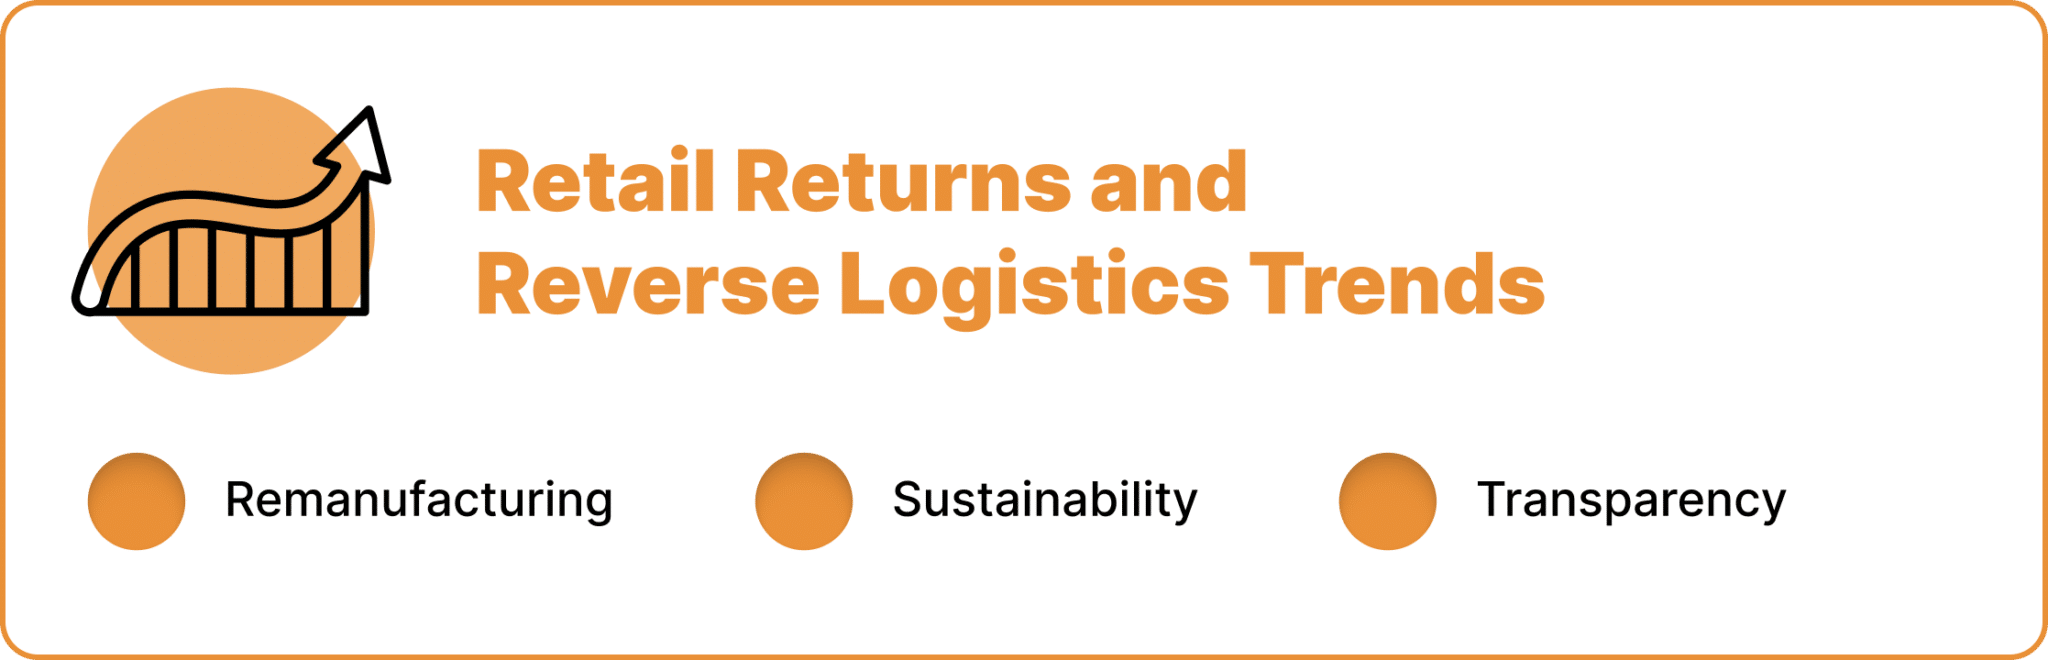 Impact of E-commerce on Retail Returns and Reverse Logistics Processes
